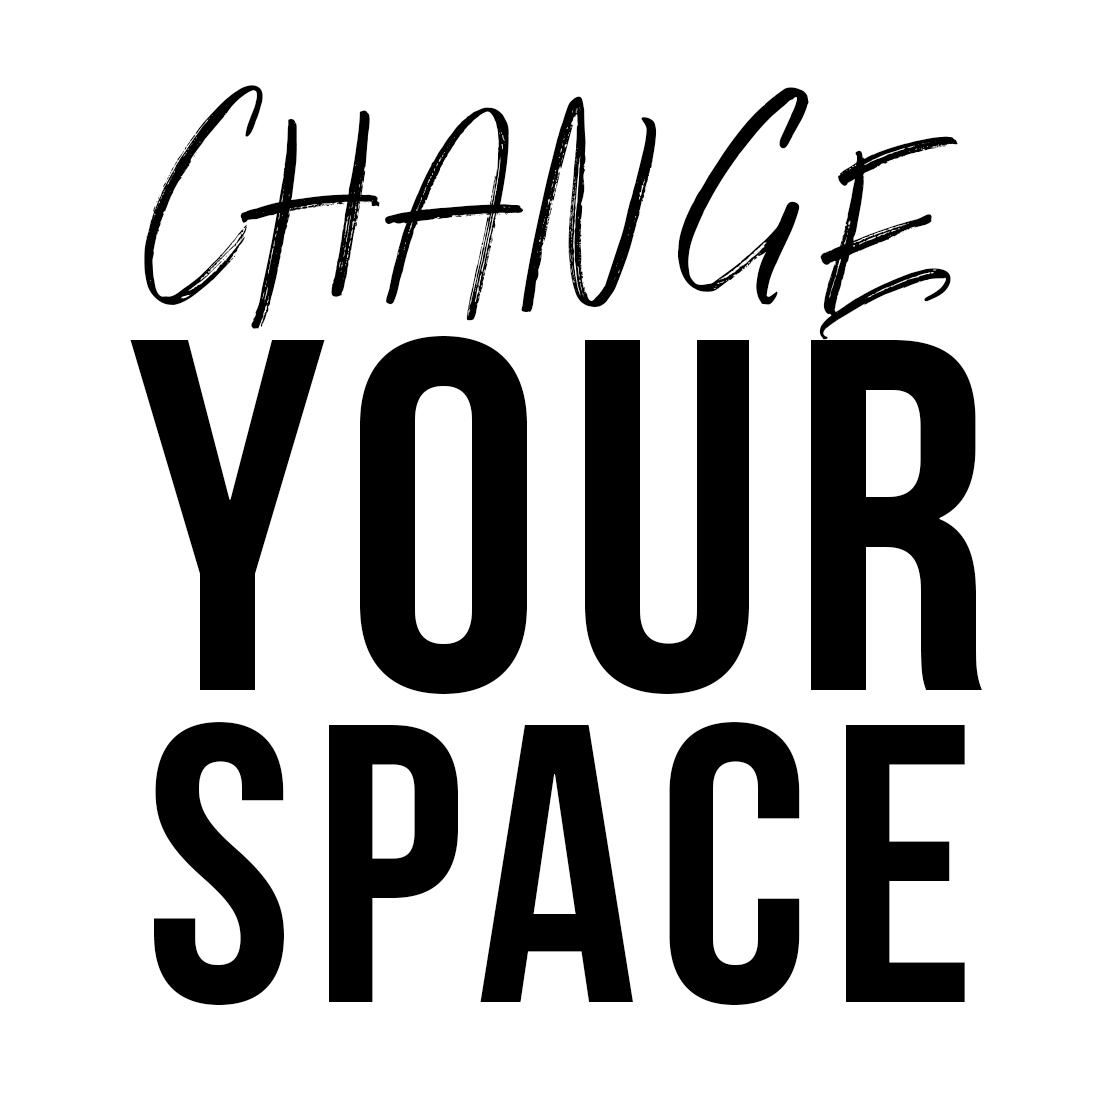 Change Your Space